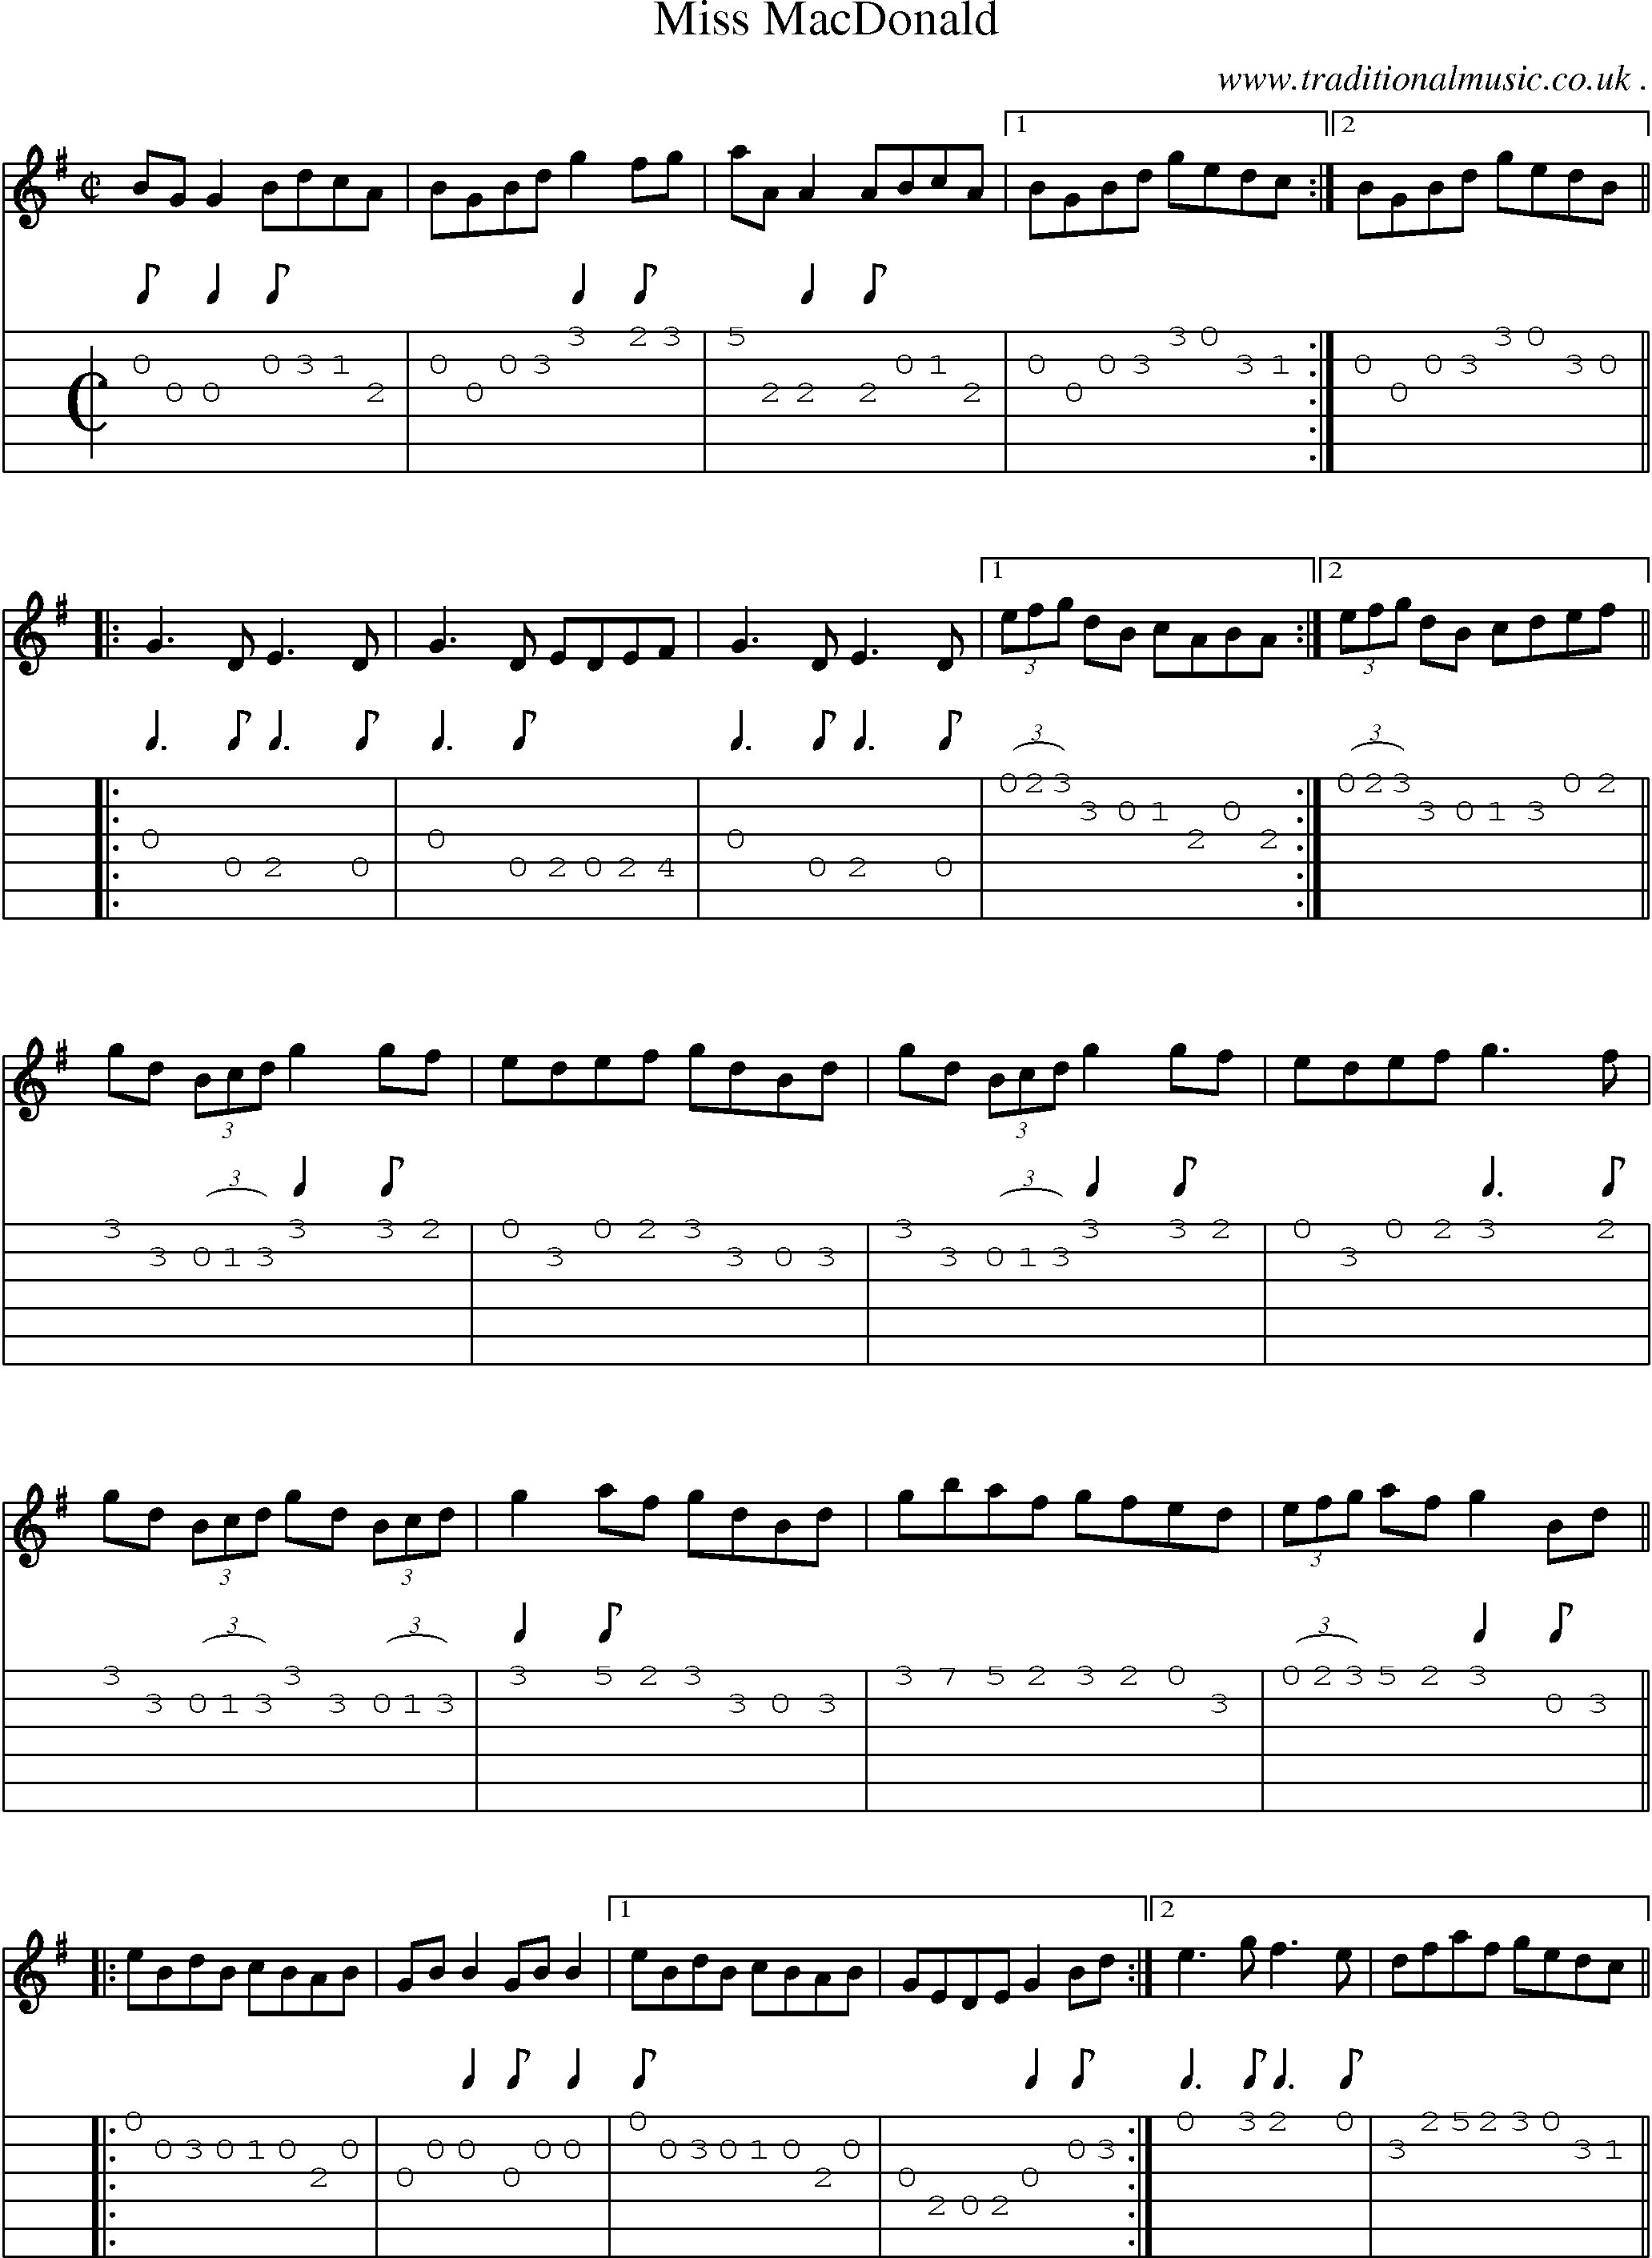 Sheet-Music and Guitar Tabs for Miss Macdonald